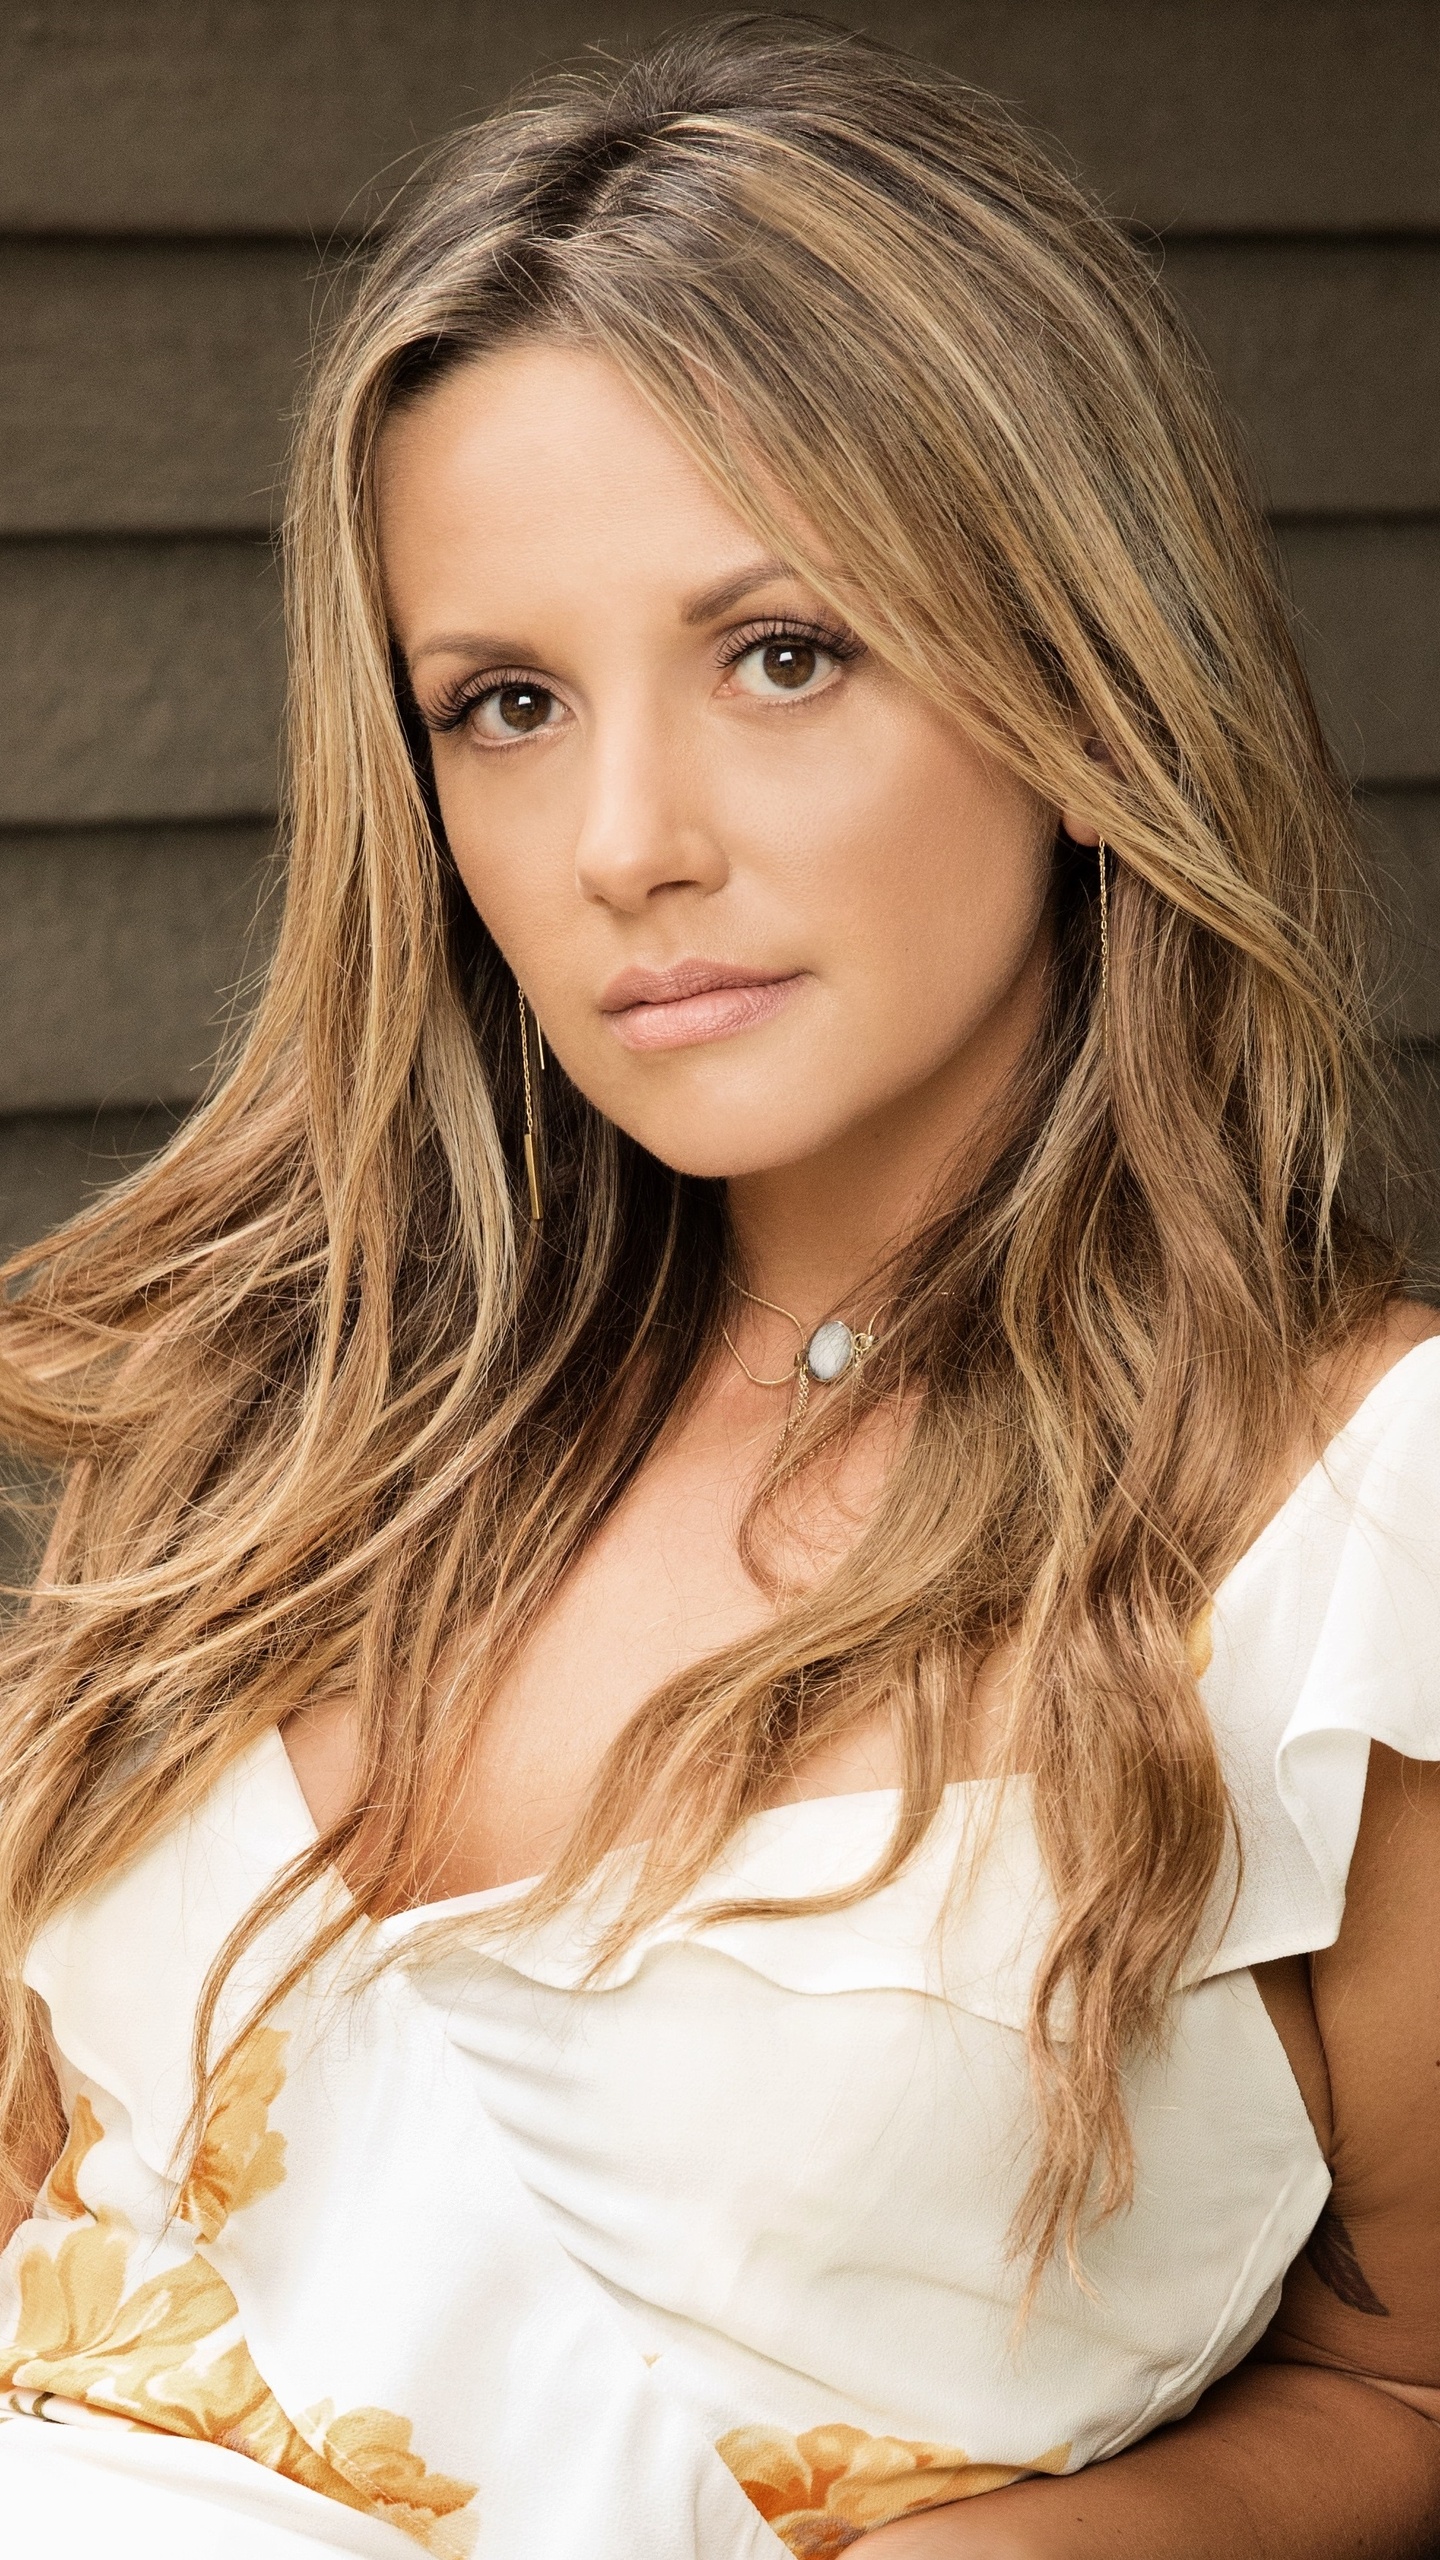 Carly Pearce In 1440x2560 Resolution. carly-pearce-q4.jpg. 